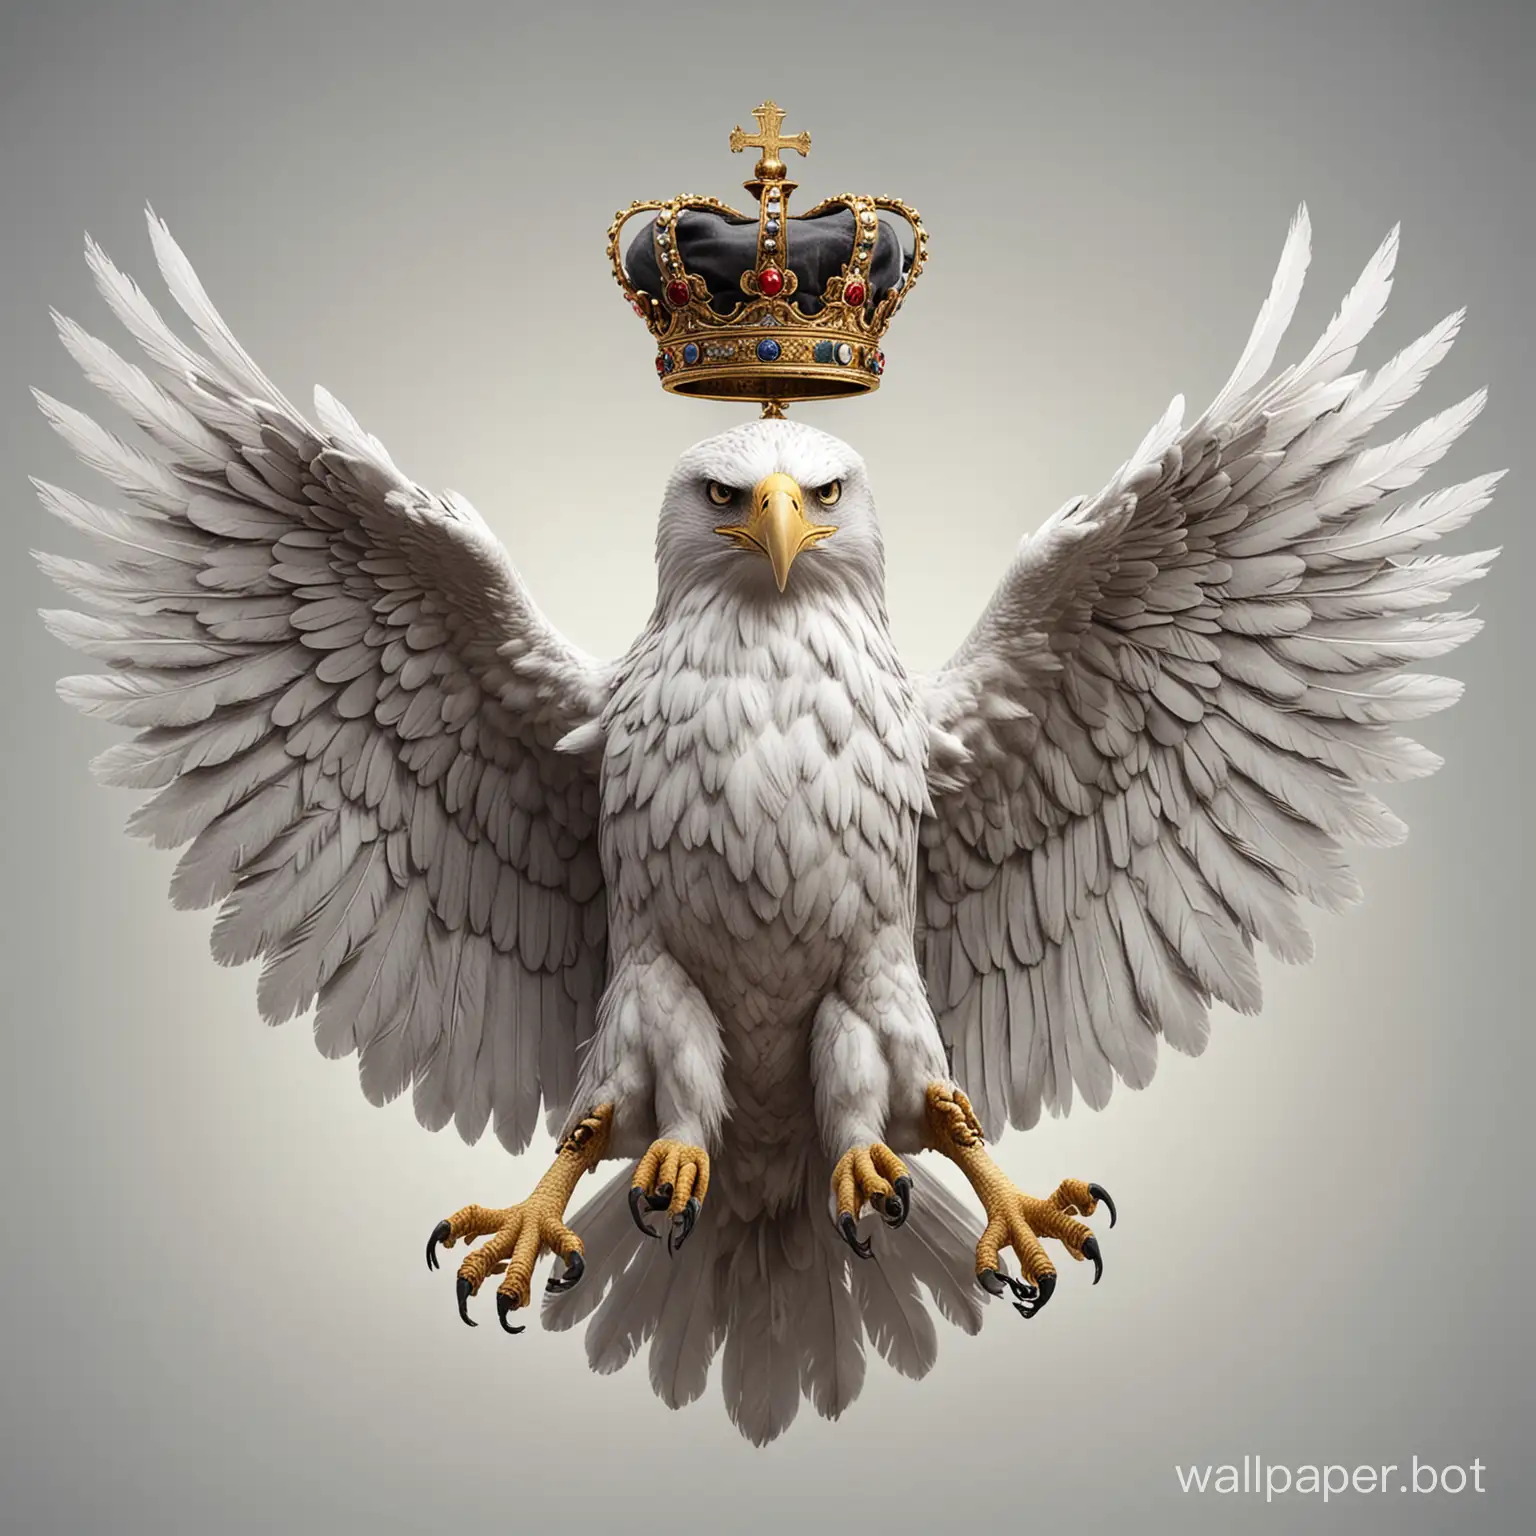 Majestic-TwoHeaded-WhiteHeaded-Eagle-with-Crowns